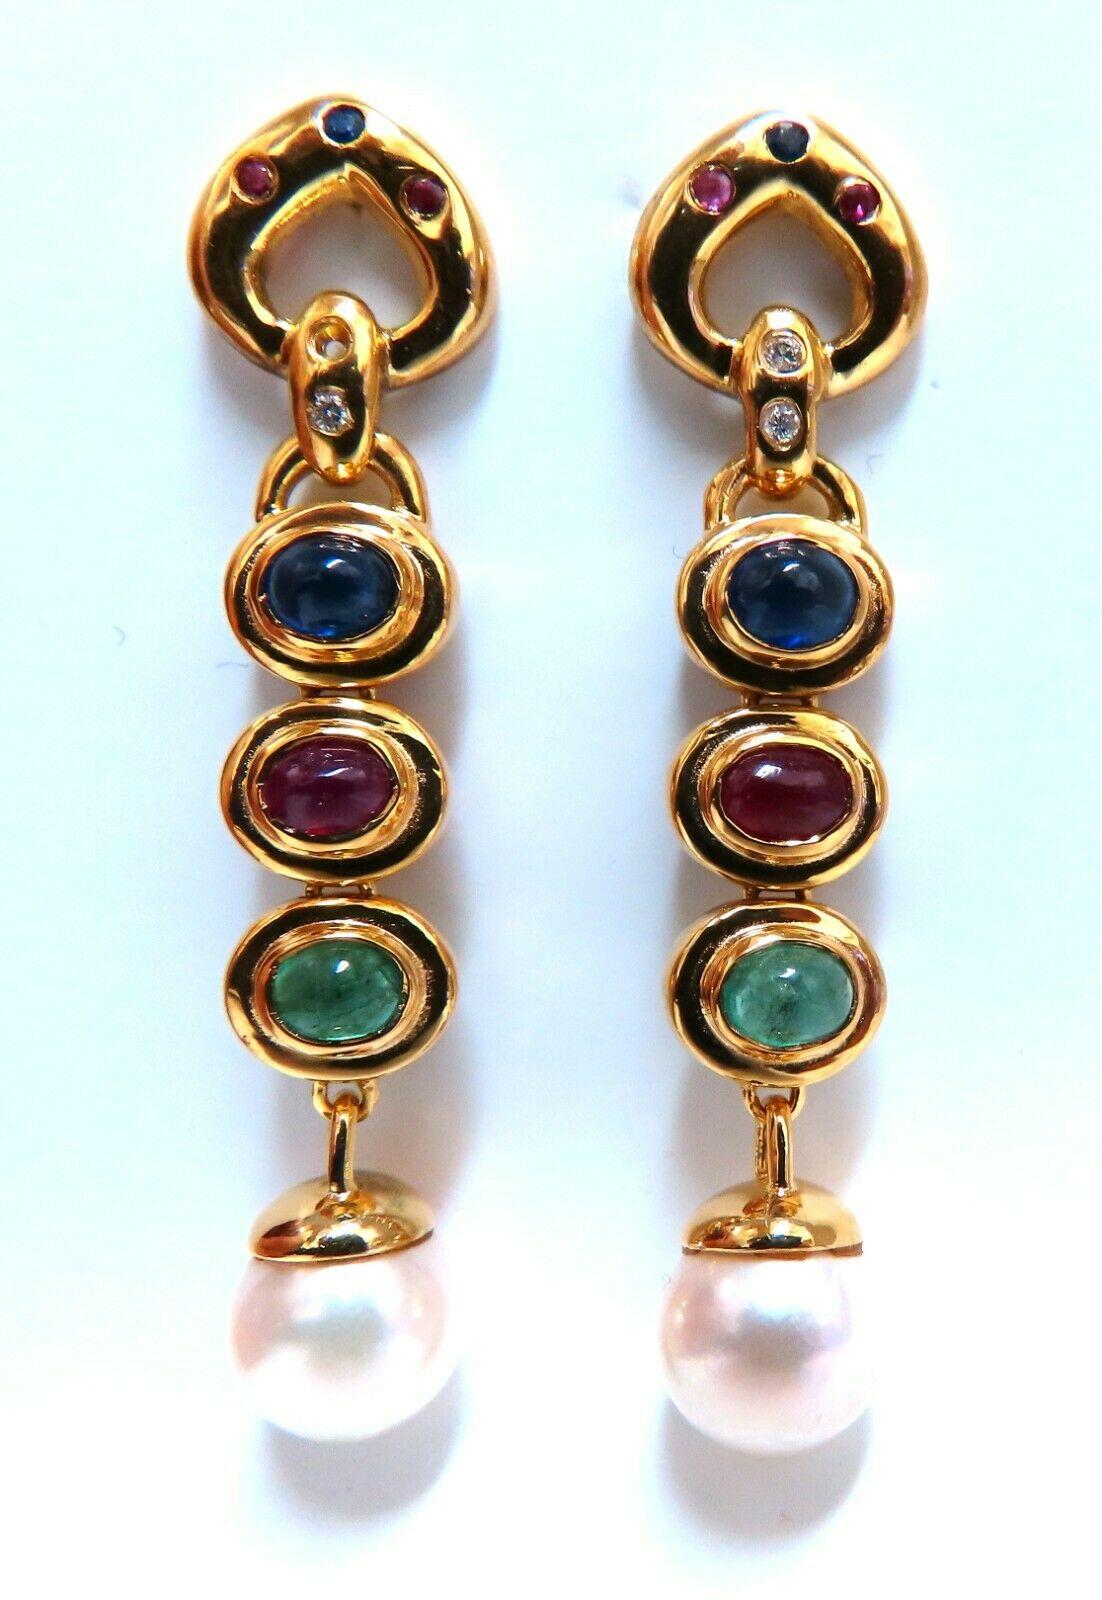 Dangling Cabochon Pearl clip earrings.

9mm Pearl

Fresh Water pearl, pink overtone

3cts Natural Ruby Sapphires & Emeralds.

14 karat yellow gold 11 grams

Overall earrings measure 2 inches

Comfortable Butterfly Post.

$4000 Appraisal to accompany